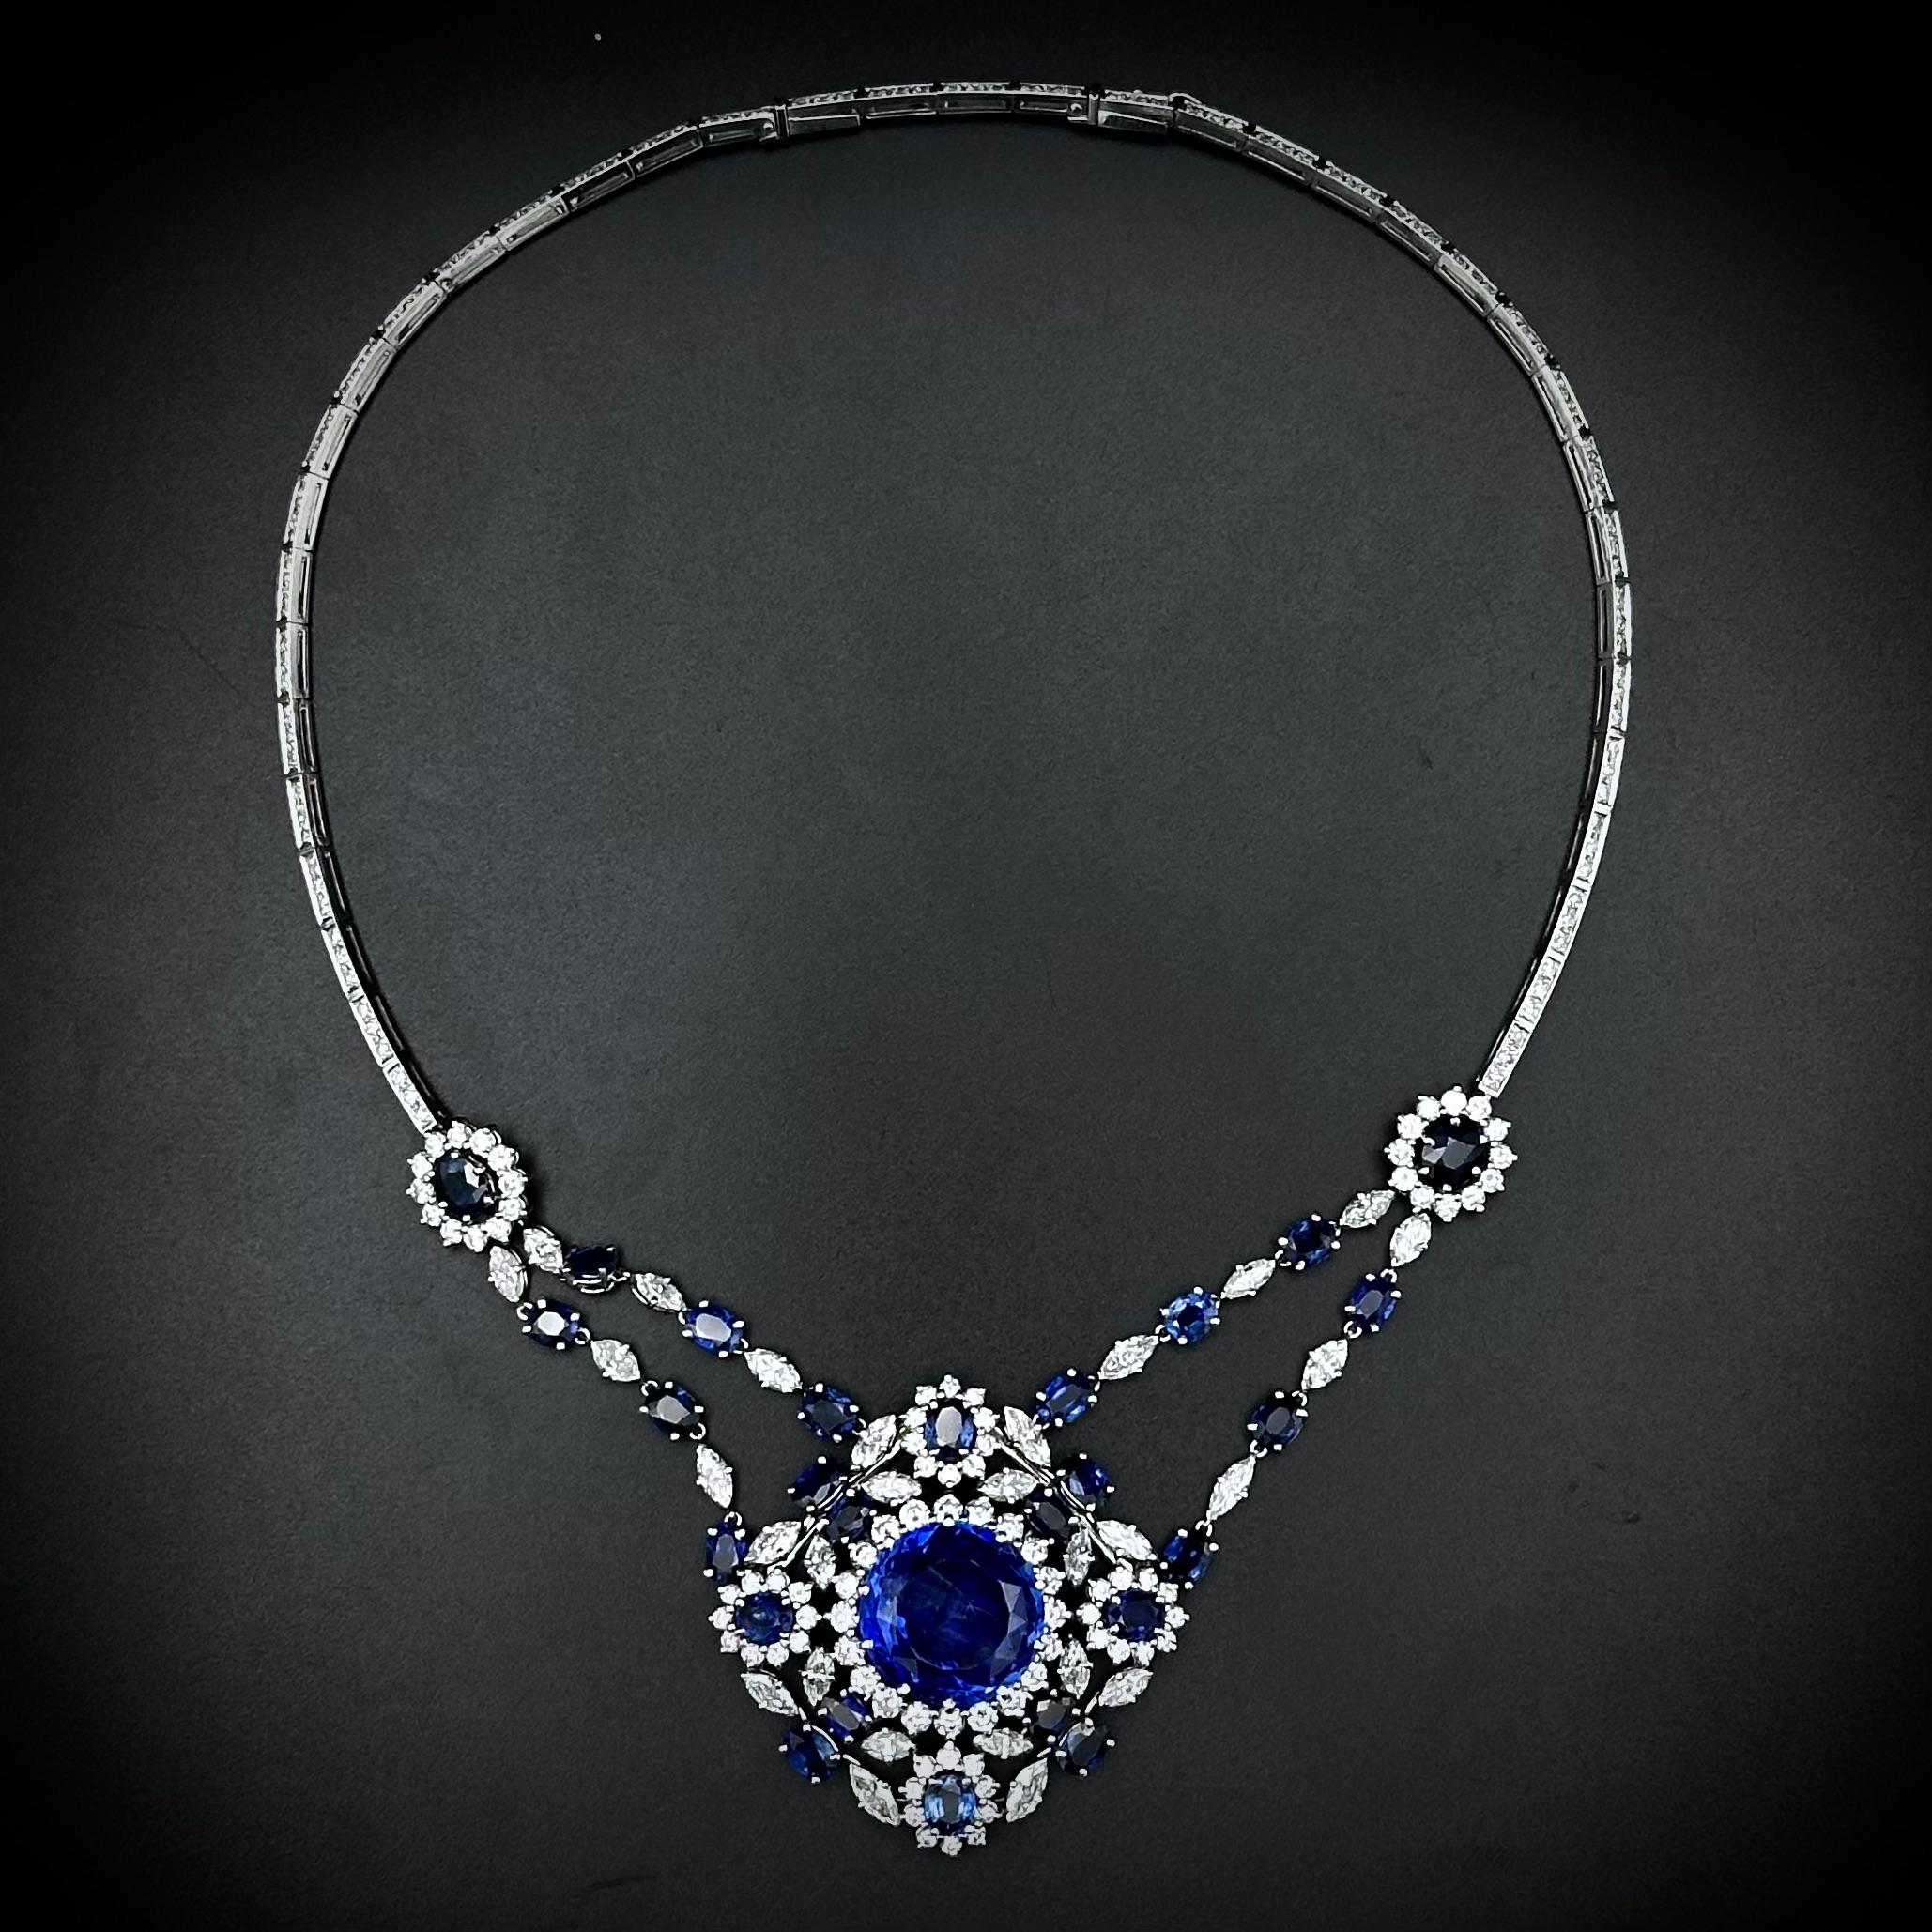 Important Natural 23 Carat Ceylon Sapphire Diamond Necklace 1950s Provenance In Good Condition For Sale In Lisbon, PT